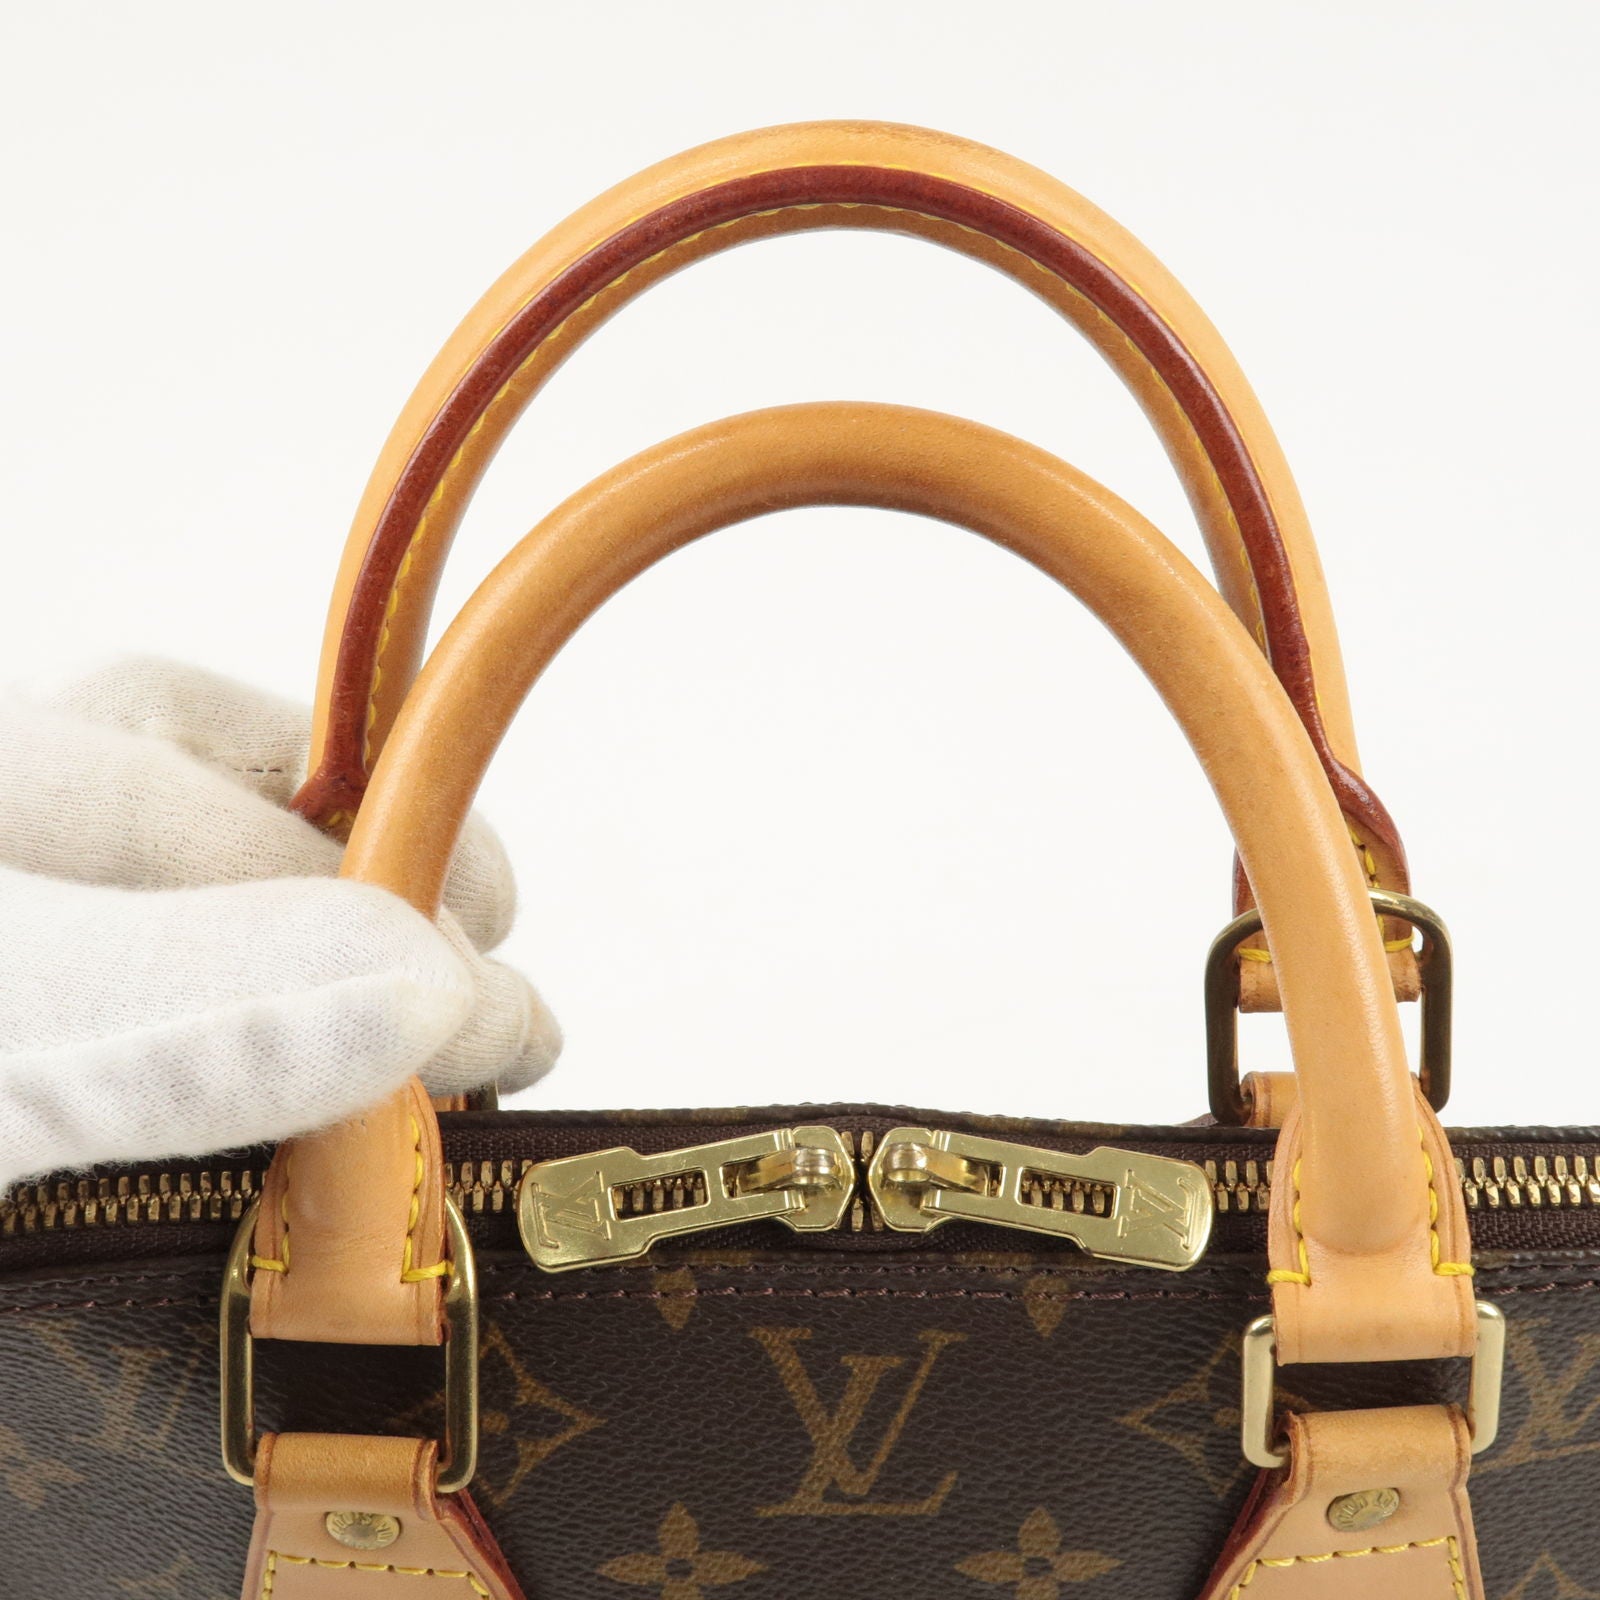 Owned Lv Artsy Bags For Women  Nike Louis Vuitton Air Force 1 Low